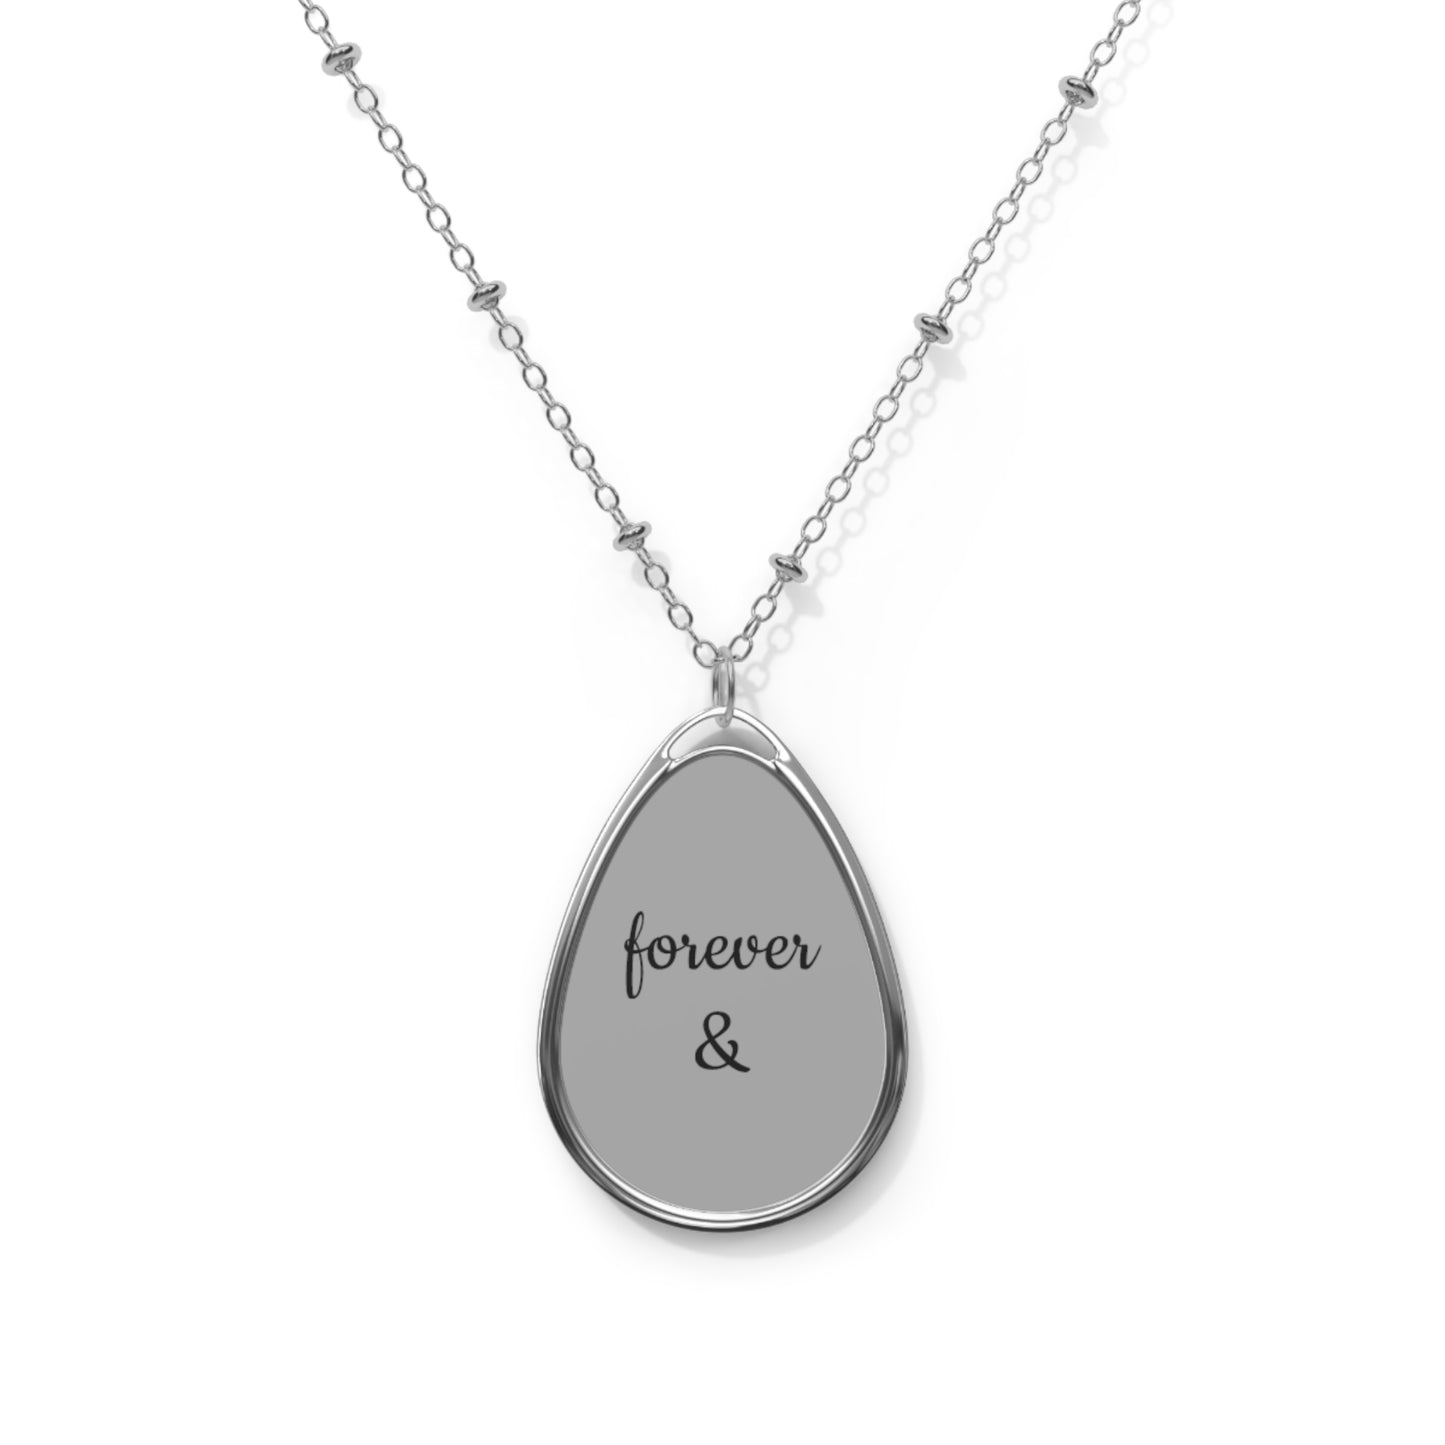 Thankful For You Collection- Forever & Oval Necklace